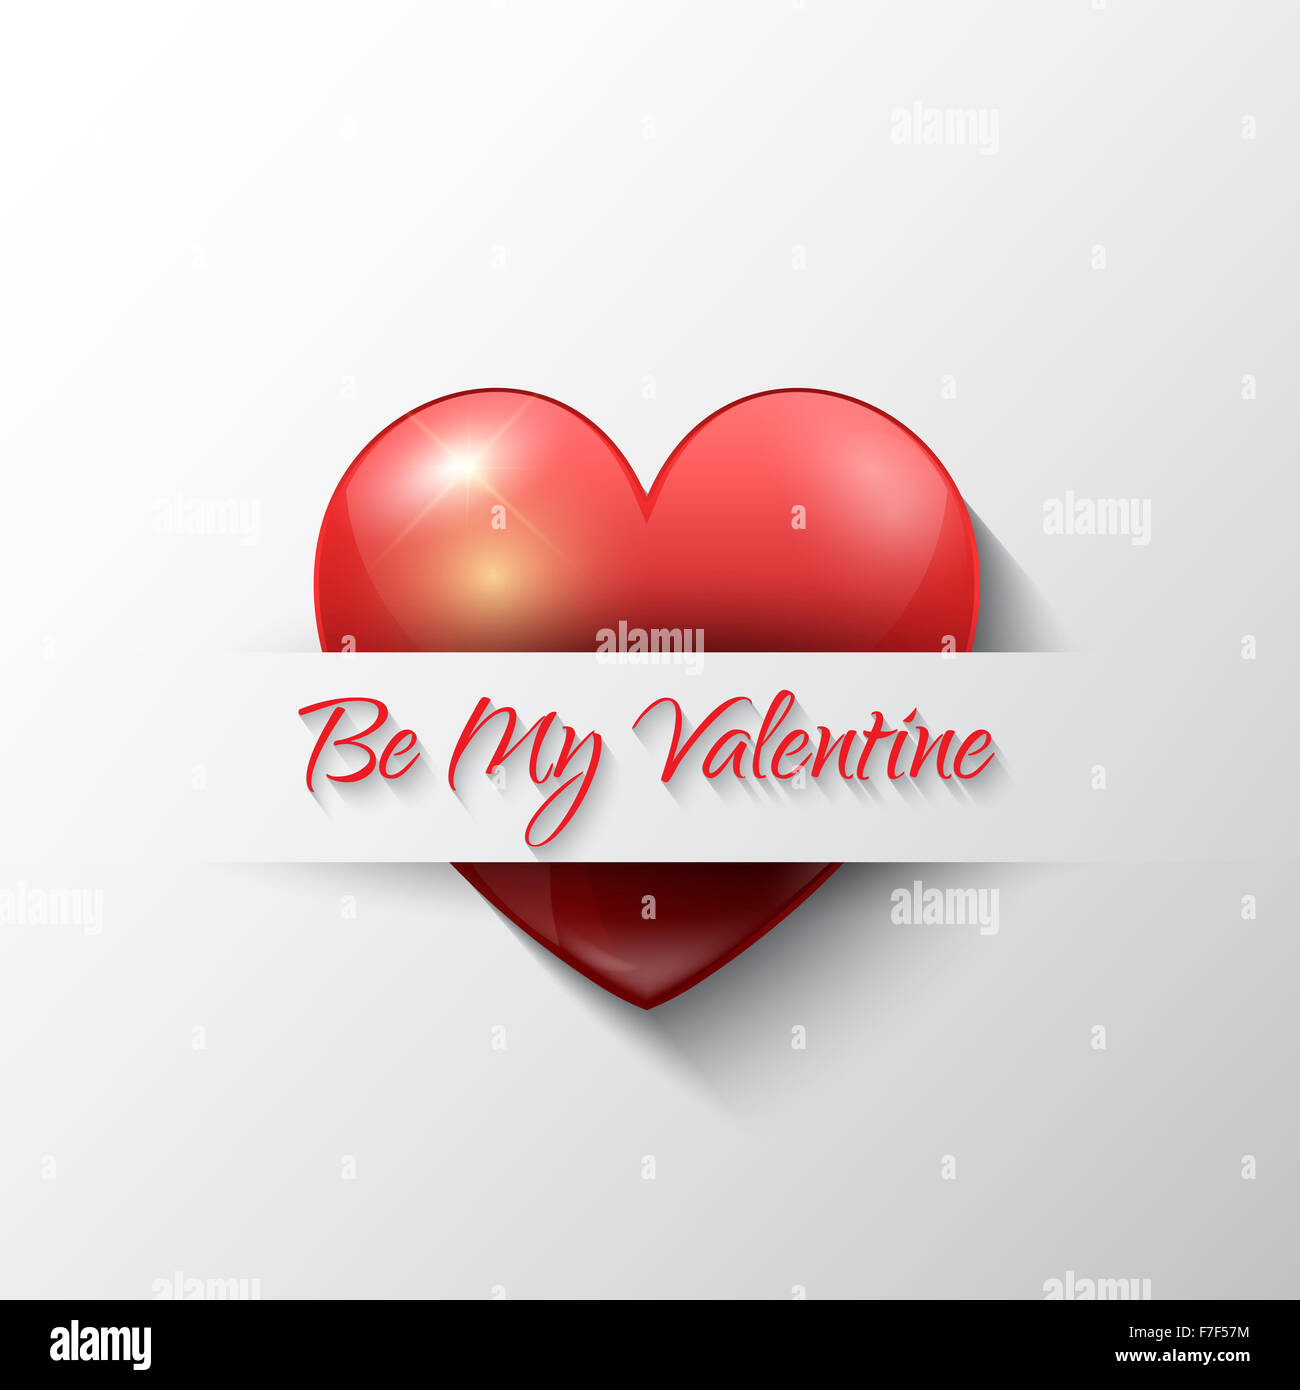 Valentine's Day background with heart design Stock Photo